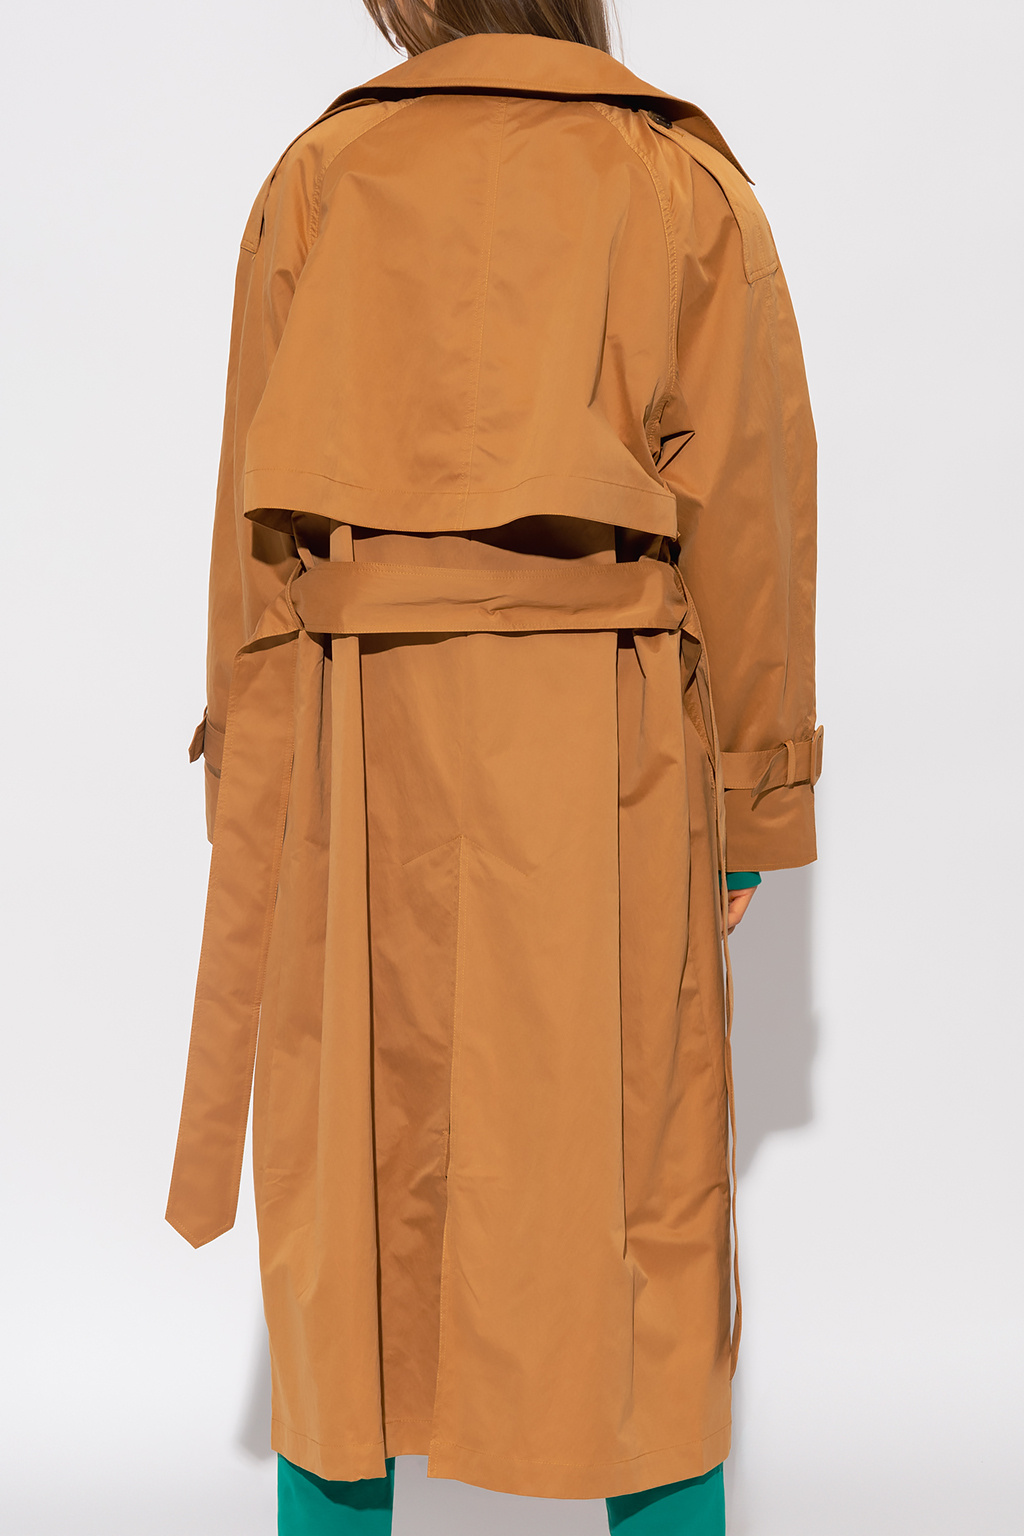 GIRLS CLOTHES 4-14 YEARS ‘Totem’ trench coat